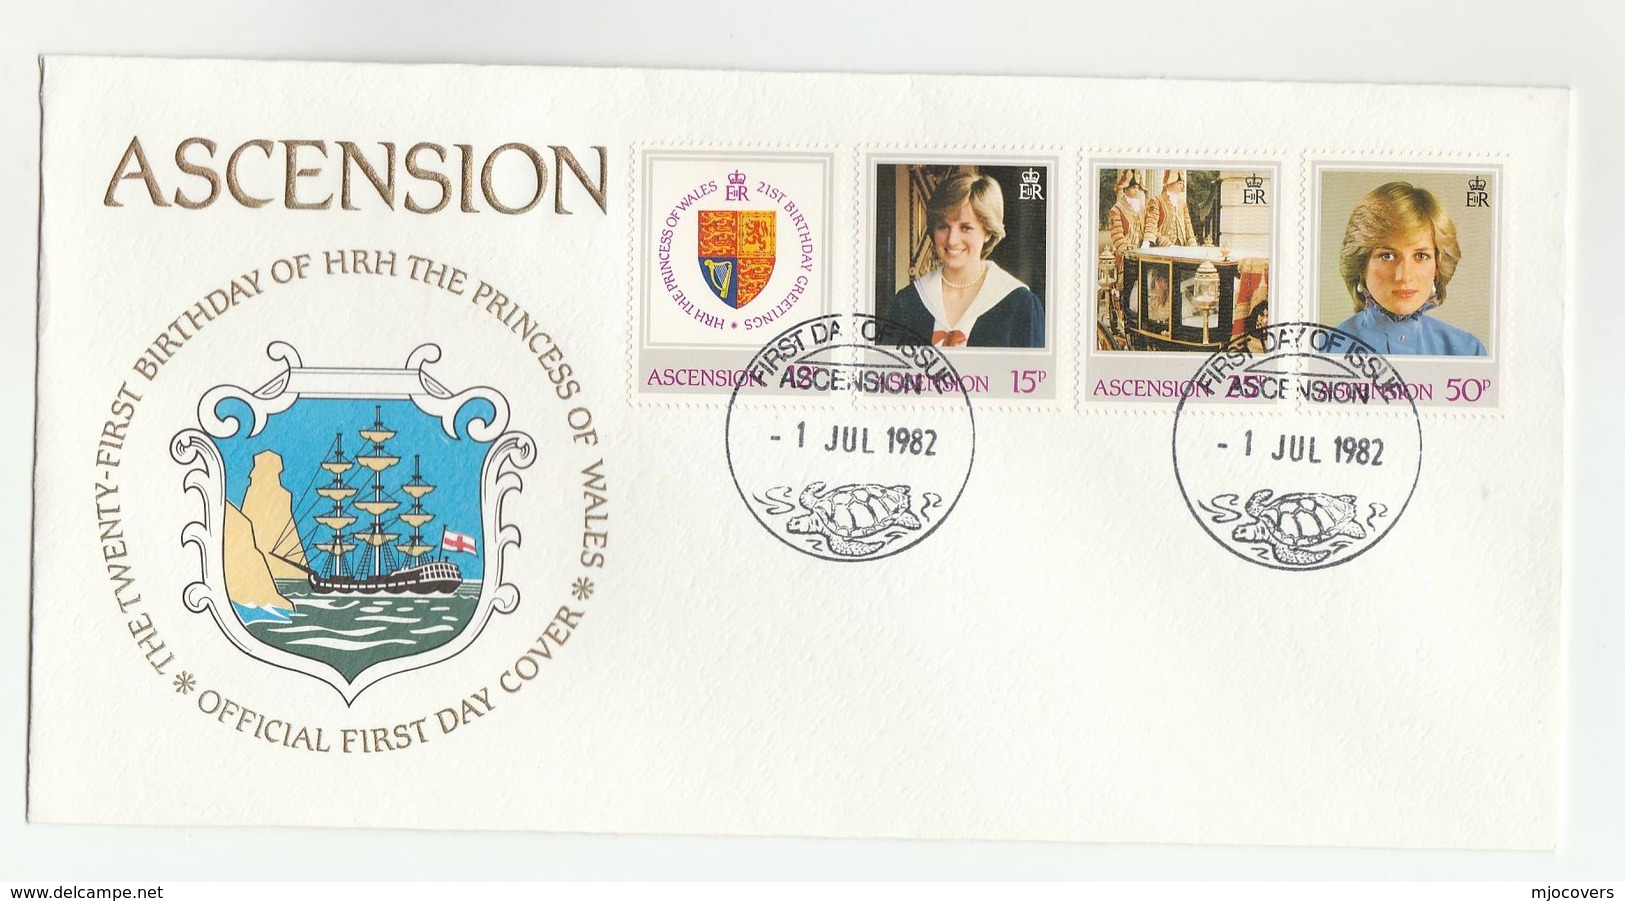 1982 ASCENSION  FDC Stamps PRINCESS DIANA BIRTHDAY HERALDIC LION  Cover Royalty Sailing Ship - Ascension